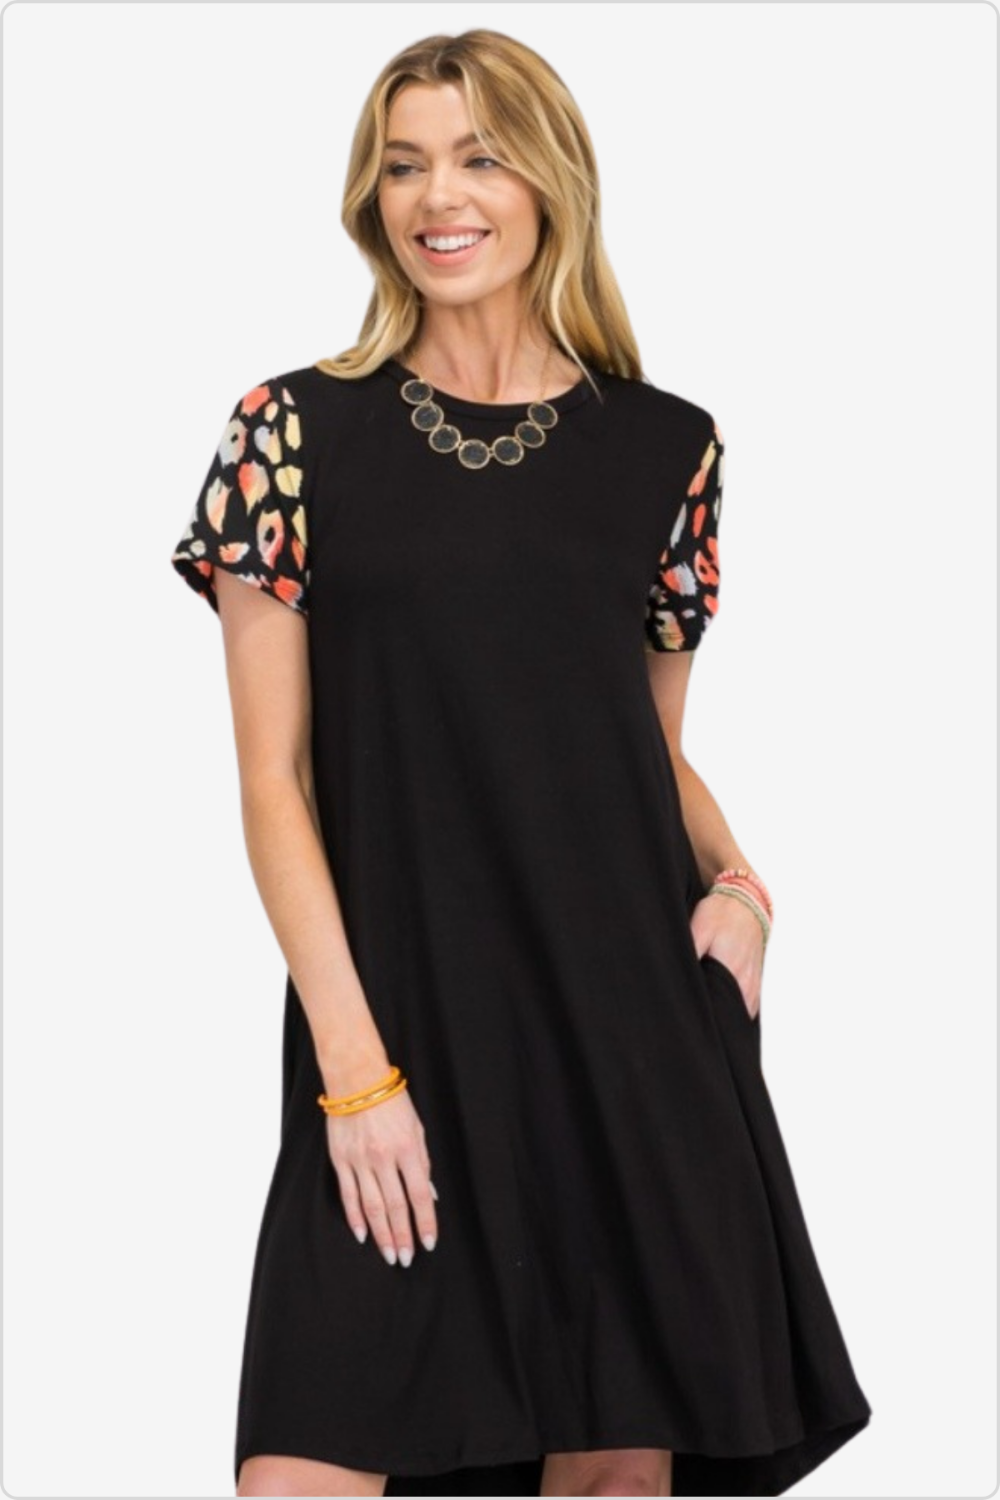 Smiling woman in a black shift dress with colorful floral sleeves, a chic casual ensemble.